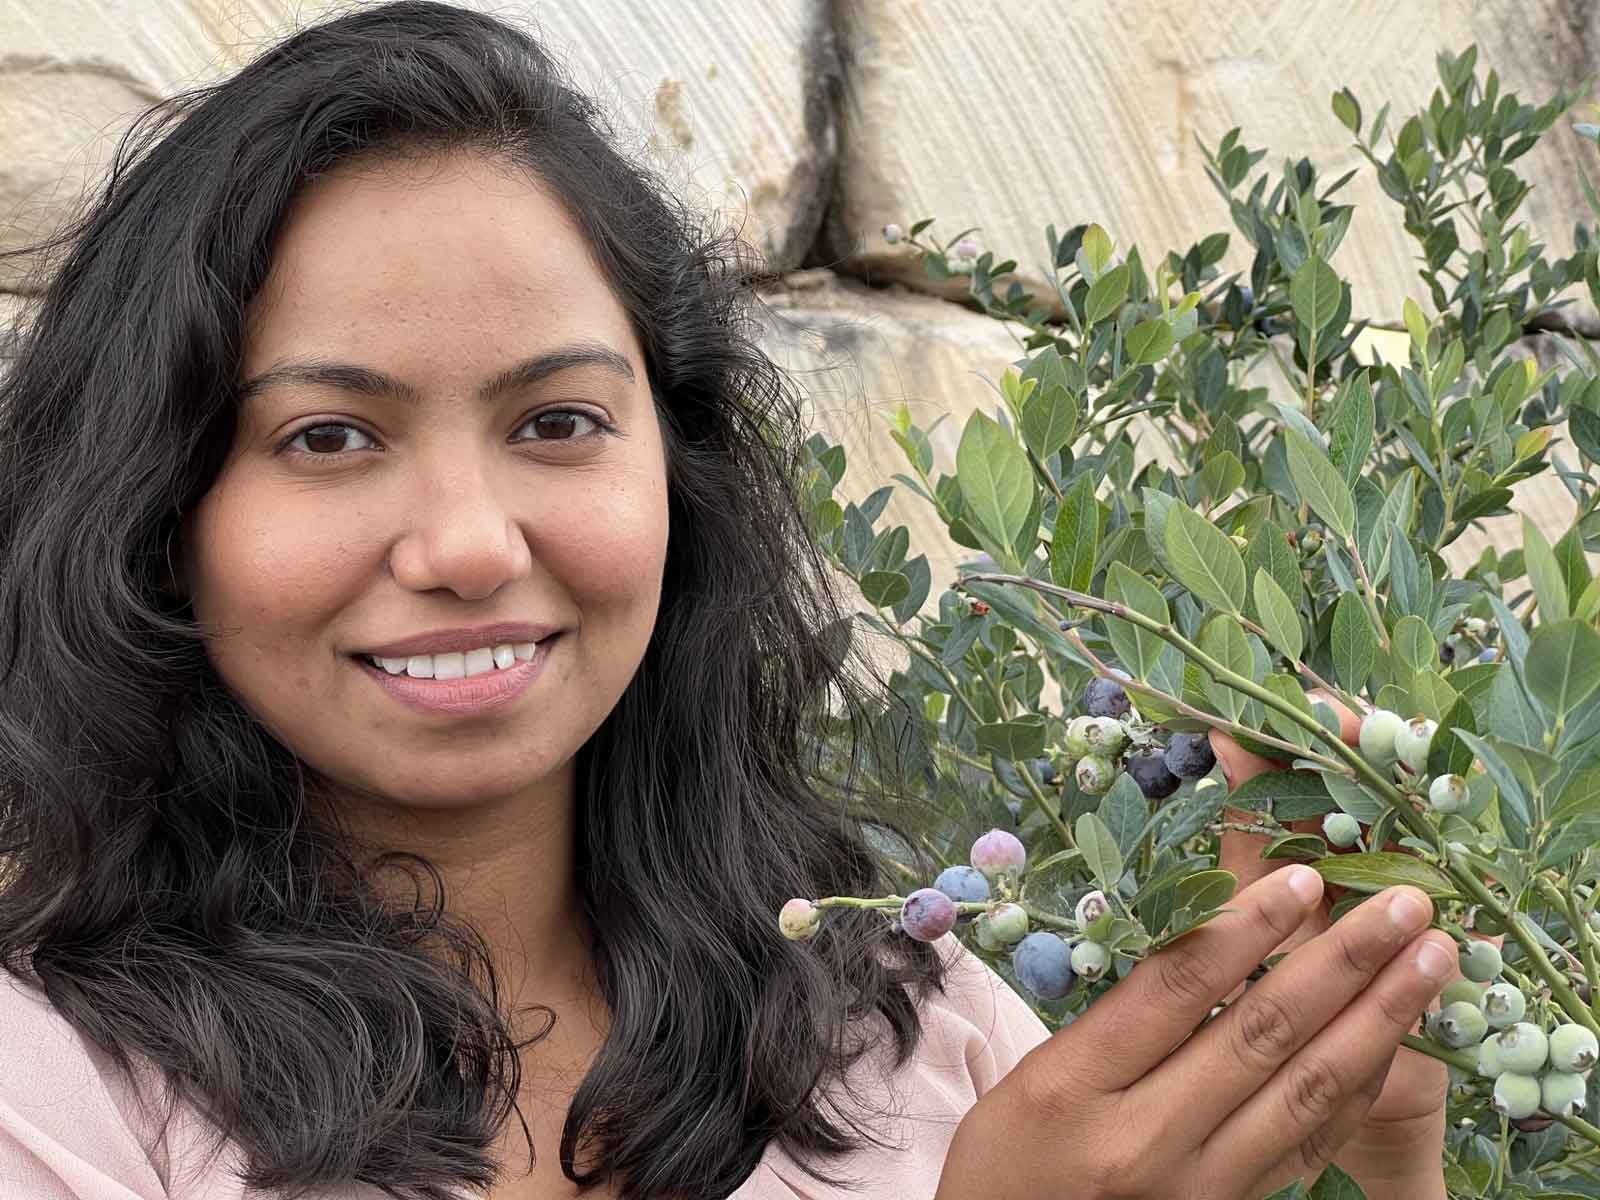 As CRC Industry PhD student attached to the 'Blueberry nutritional optimisation' project, Gareema Pandey is working with crop scientists and sustainability experts at Western Sydney University and NSW Department of Primary Industries to improve the nutritional profile of blueberries grown undercover.